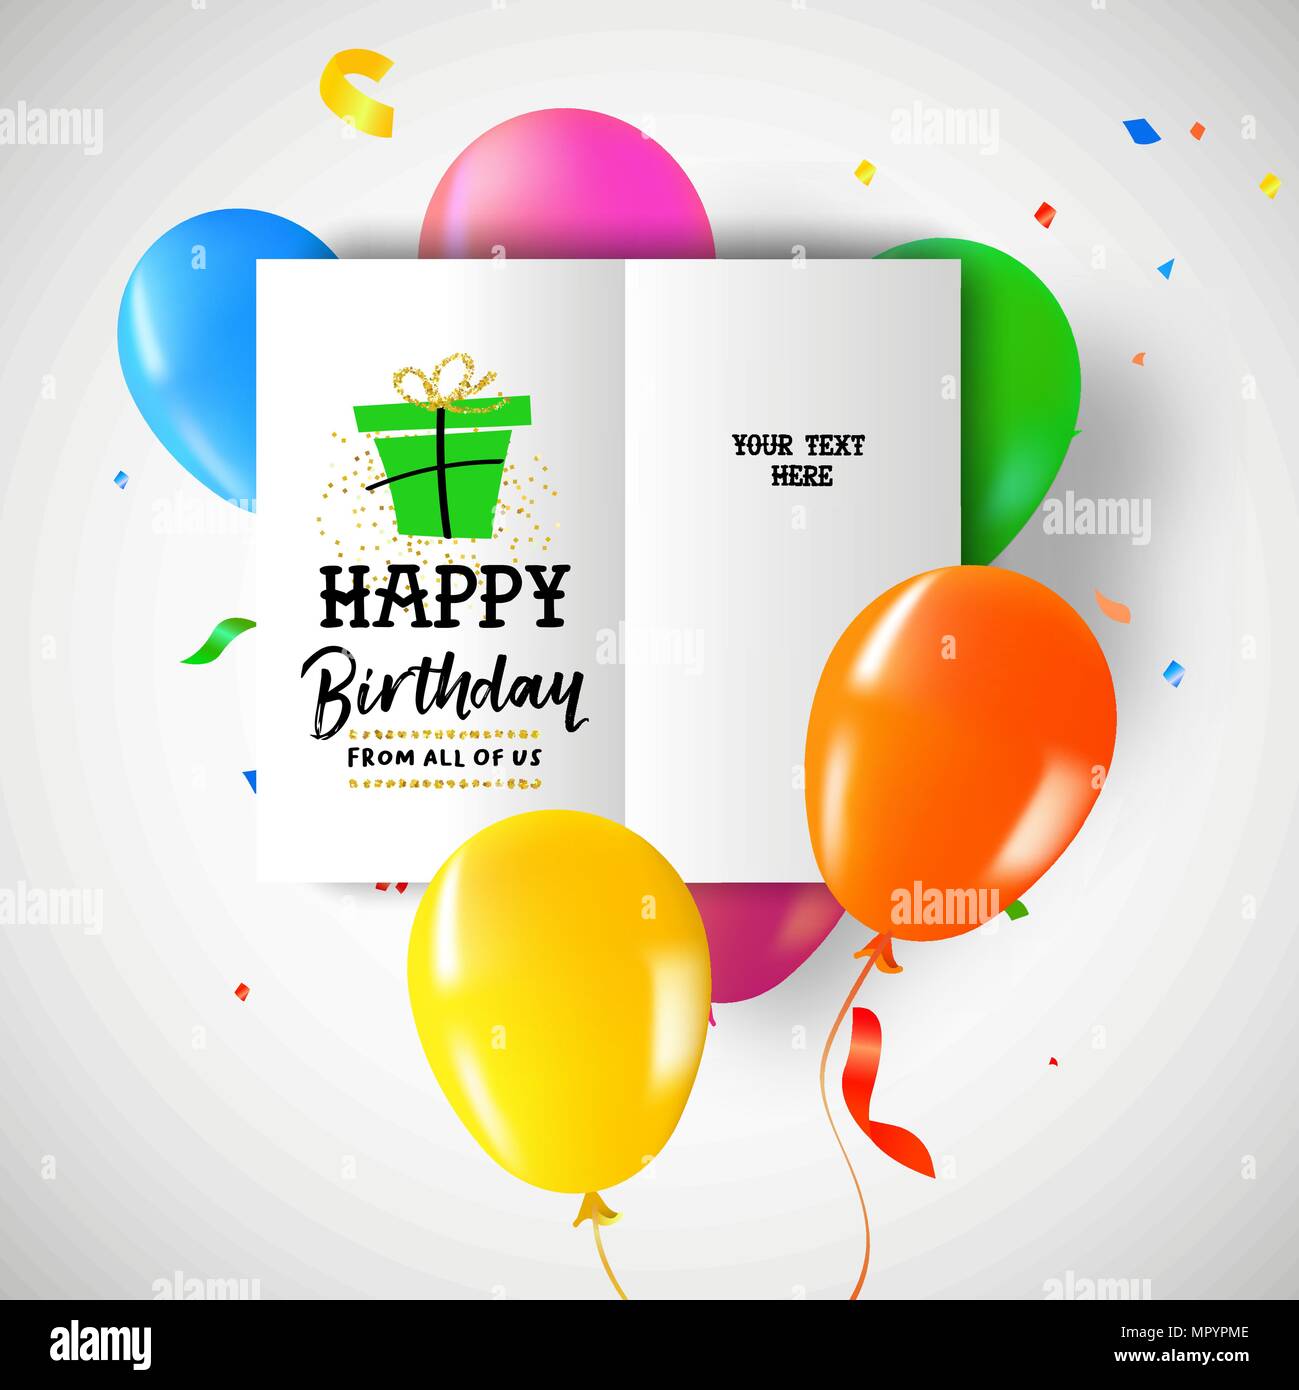 Happy Birthday greeting card on colorful party balloons and confetti background for special day. EPS10 vector. Stock Vector